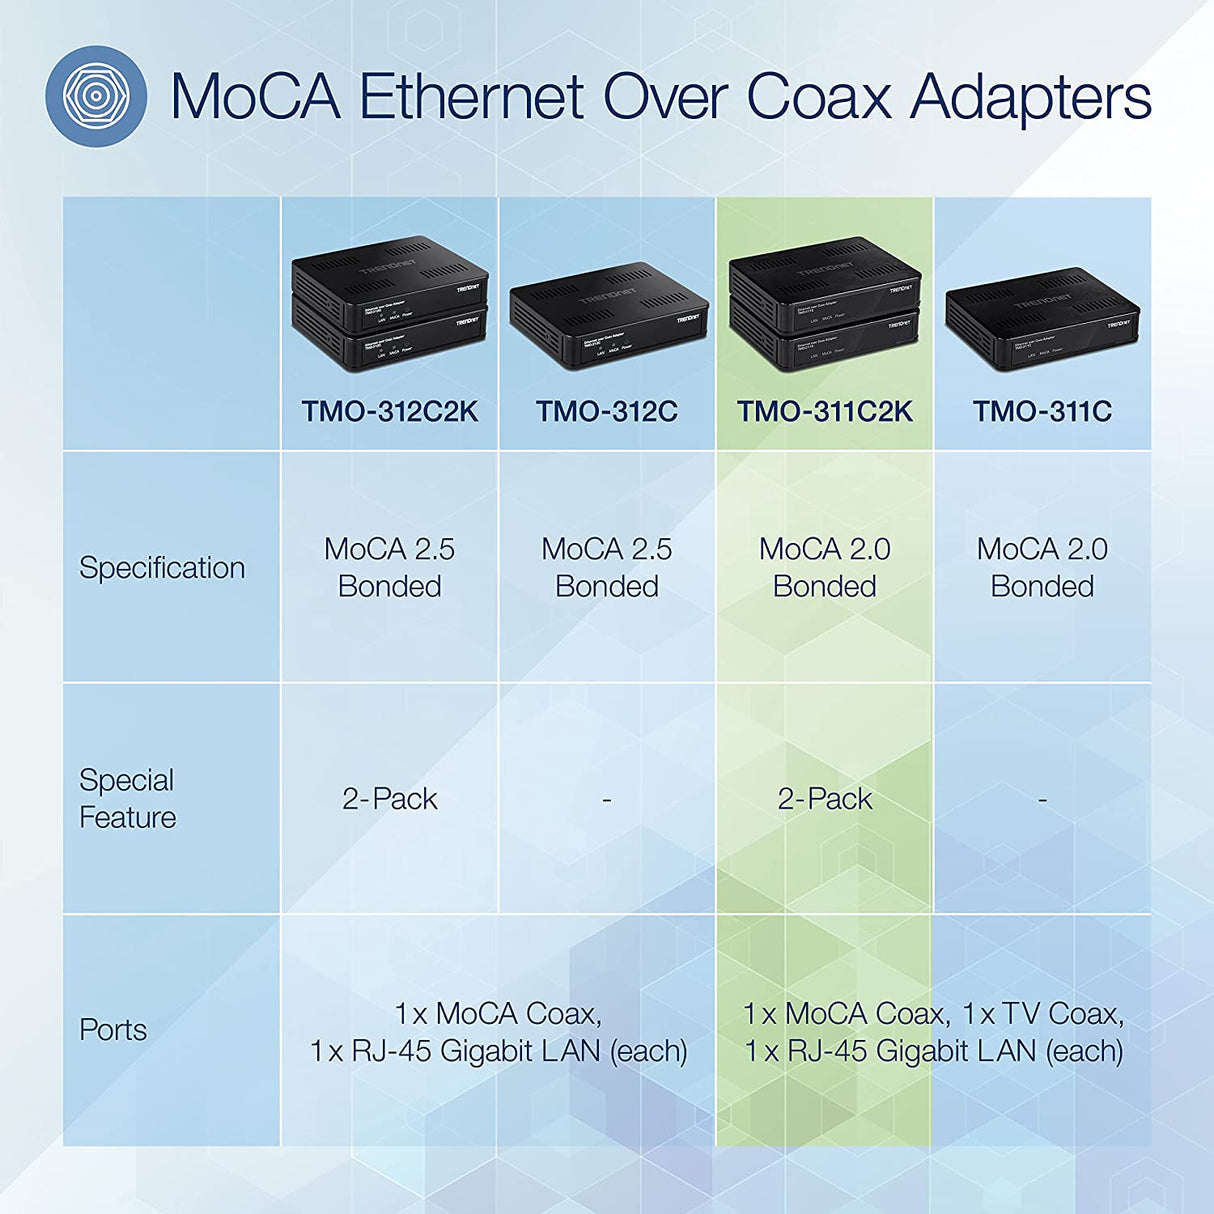 TRENDnet Ethernet Over Coax Adapter,(2-Pack), Backward Compatible with MoCA 2.0, Gigabit LAN Port, Supports Net Throughput Up to 1Gbps, Supports Up to 16 Nodes on One Network, Black, TMO-311C2K 2-Pack MoCA 2.0